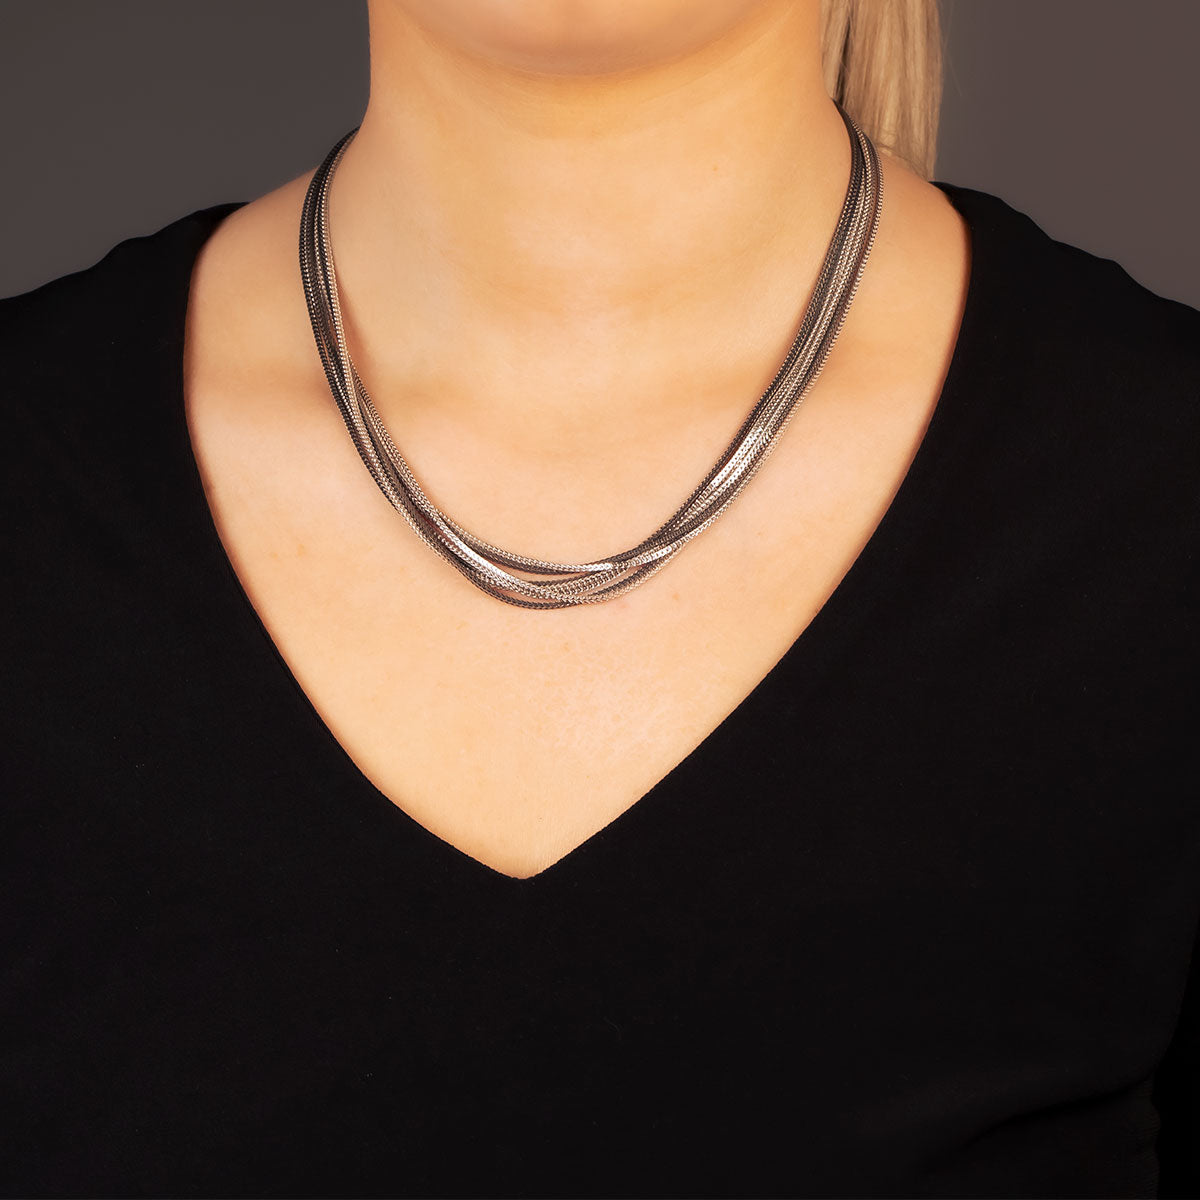 Multiple Chains Necklace in Silver & Black Rhodium